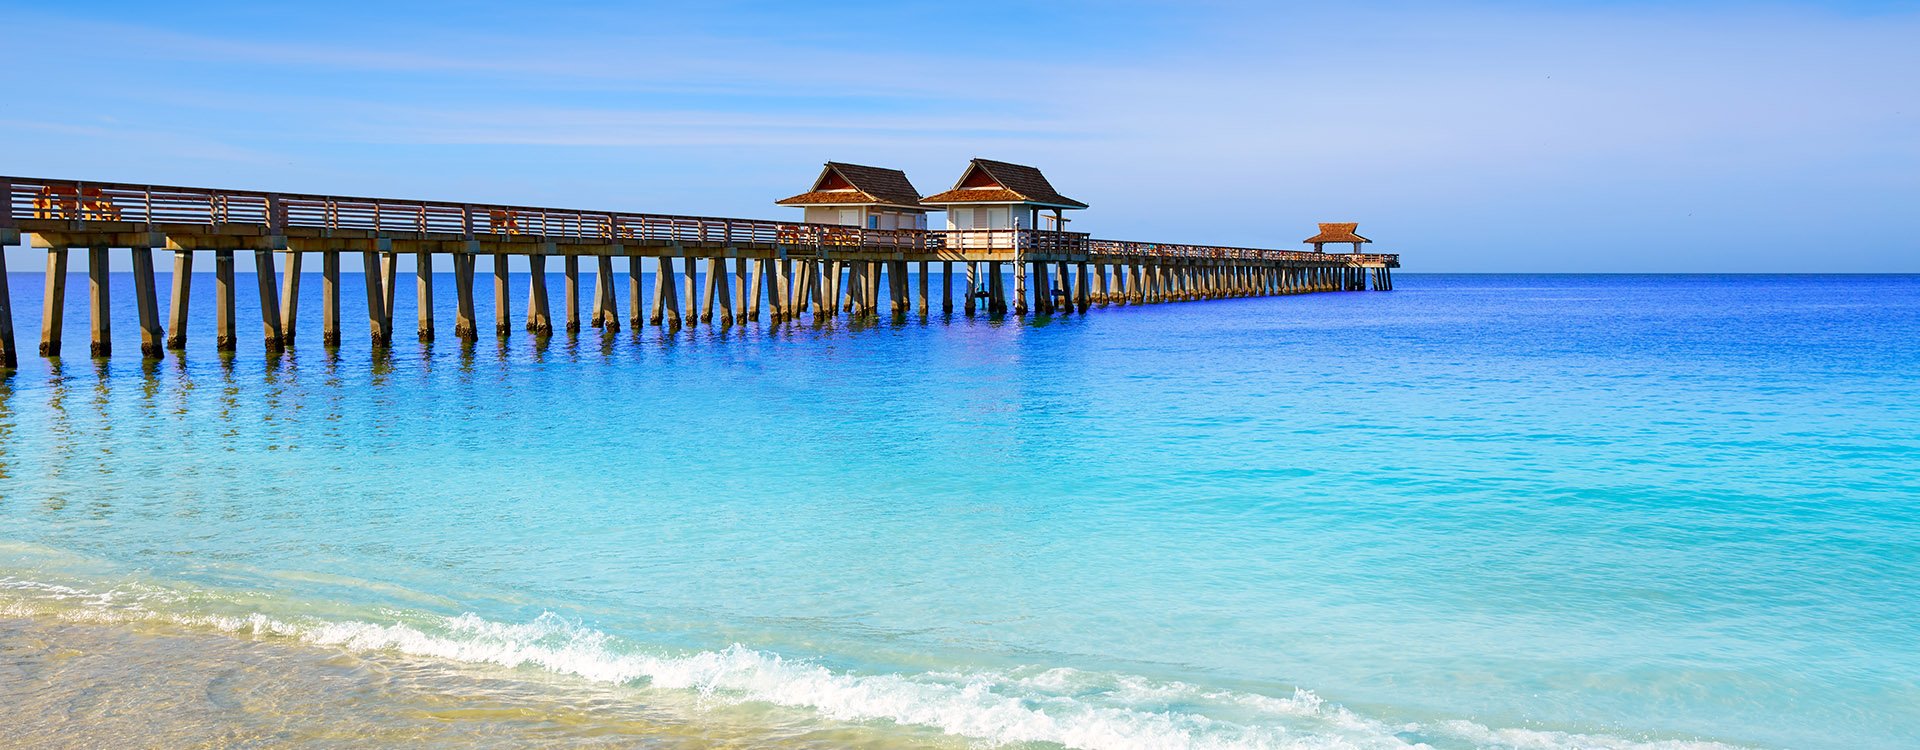 Naples Pier and beach in florida USA sunny day